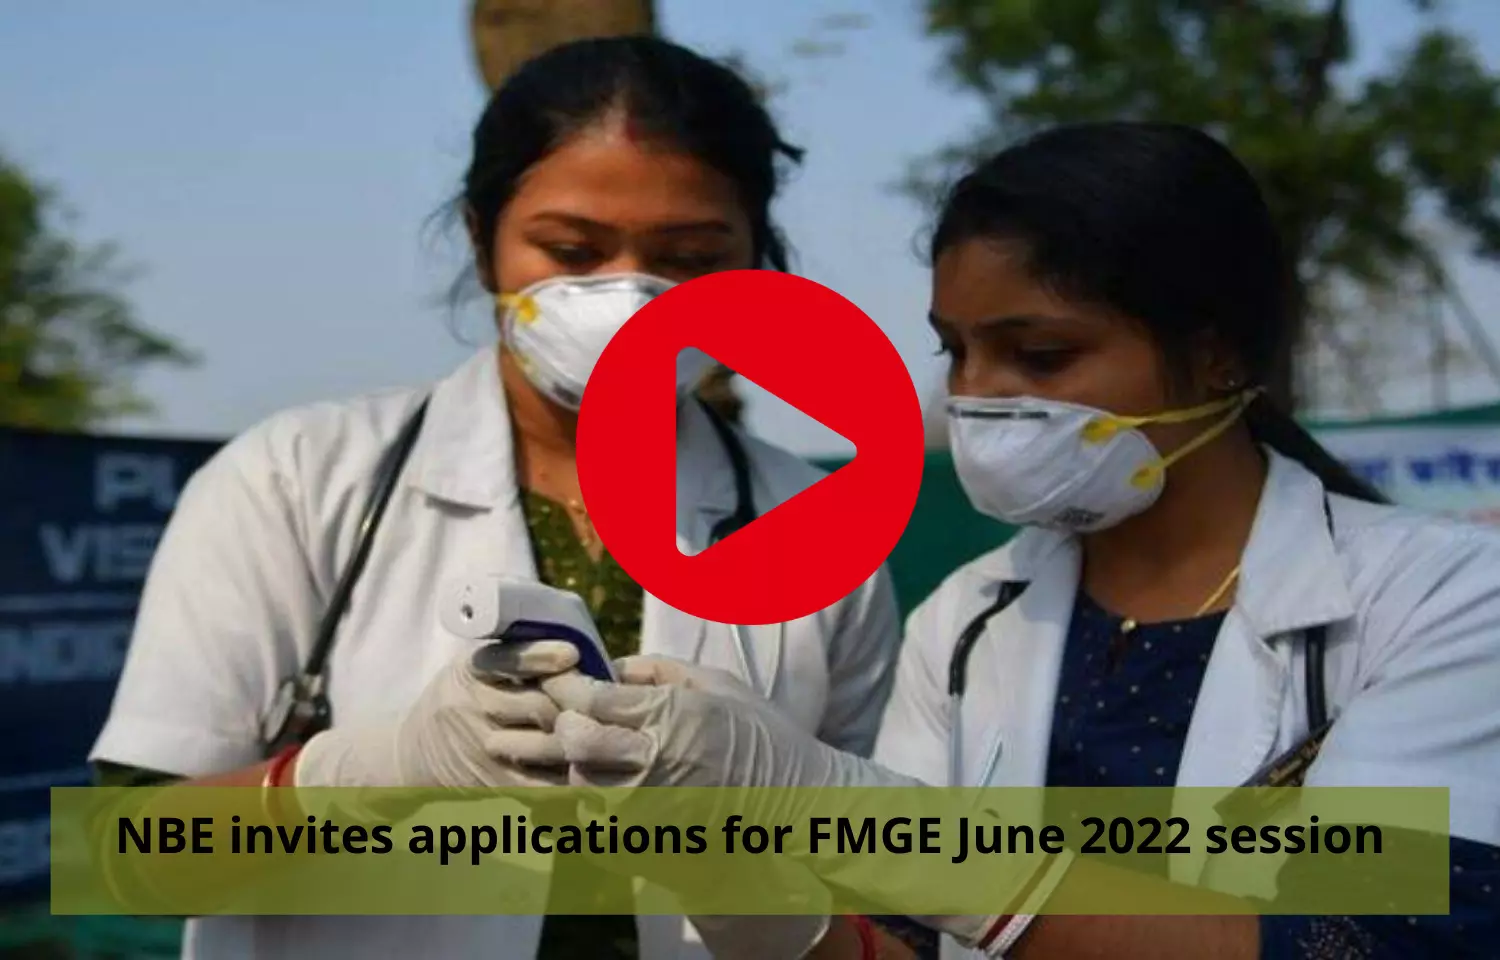 NBE invites applications for FMGE June 2022 session